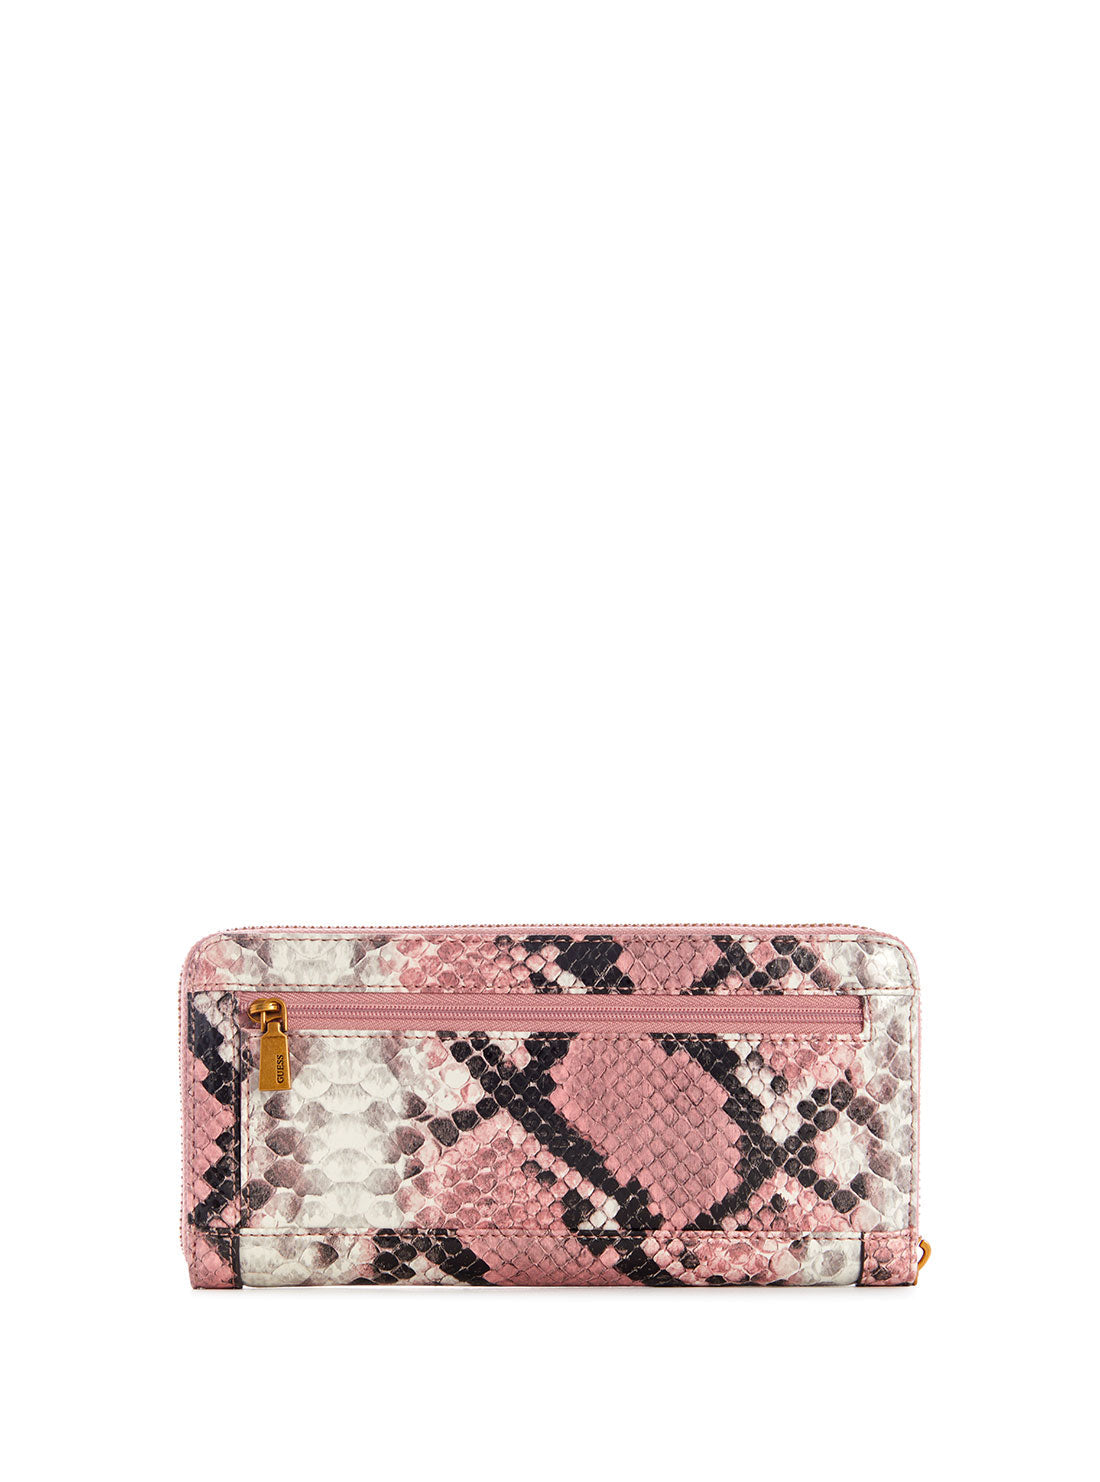 GUESS Womens Pink Python Abey Large Zip Wallet Inside View